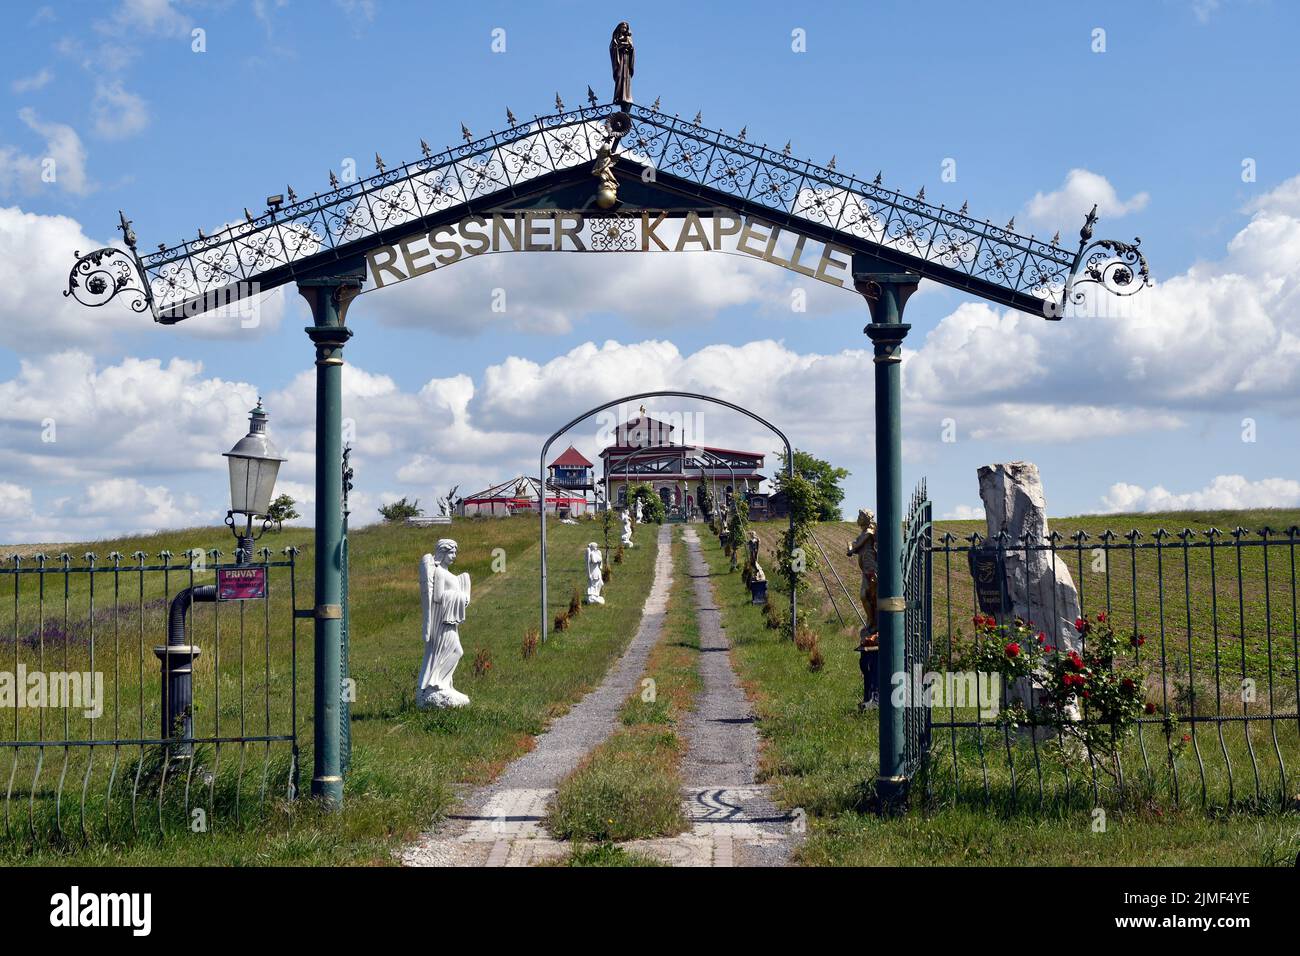 Rauchenwarth, Austria - June 01, 2022:  Private Ressner chapel with many angel statues and buildings near Rauchenwarth village in Lower Austria, erect Stock Photo